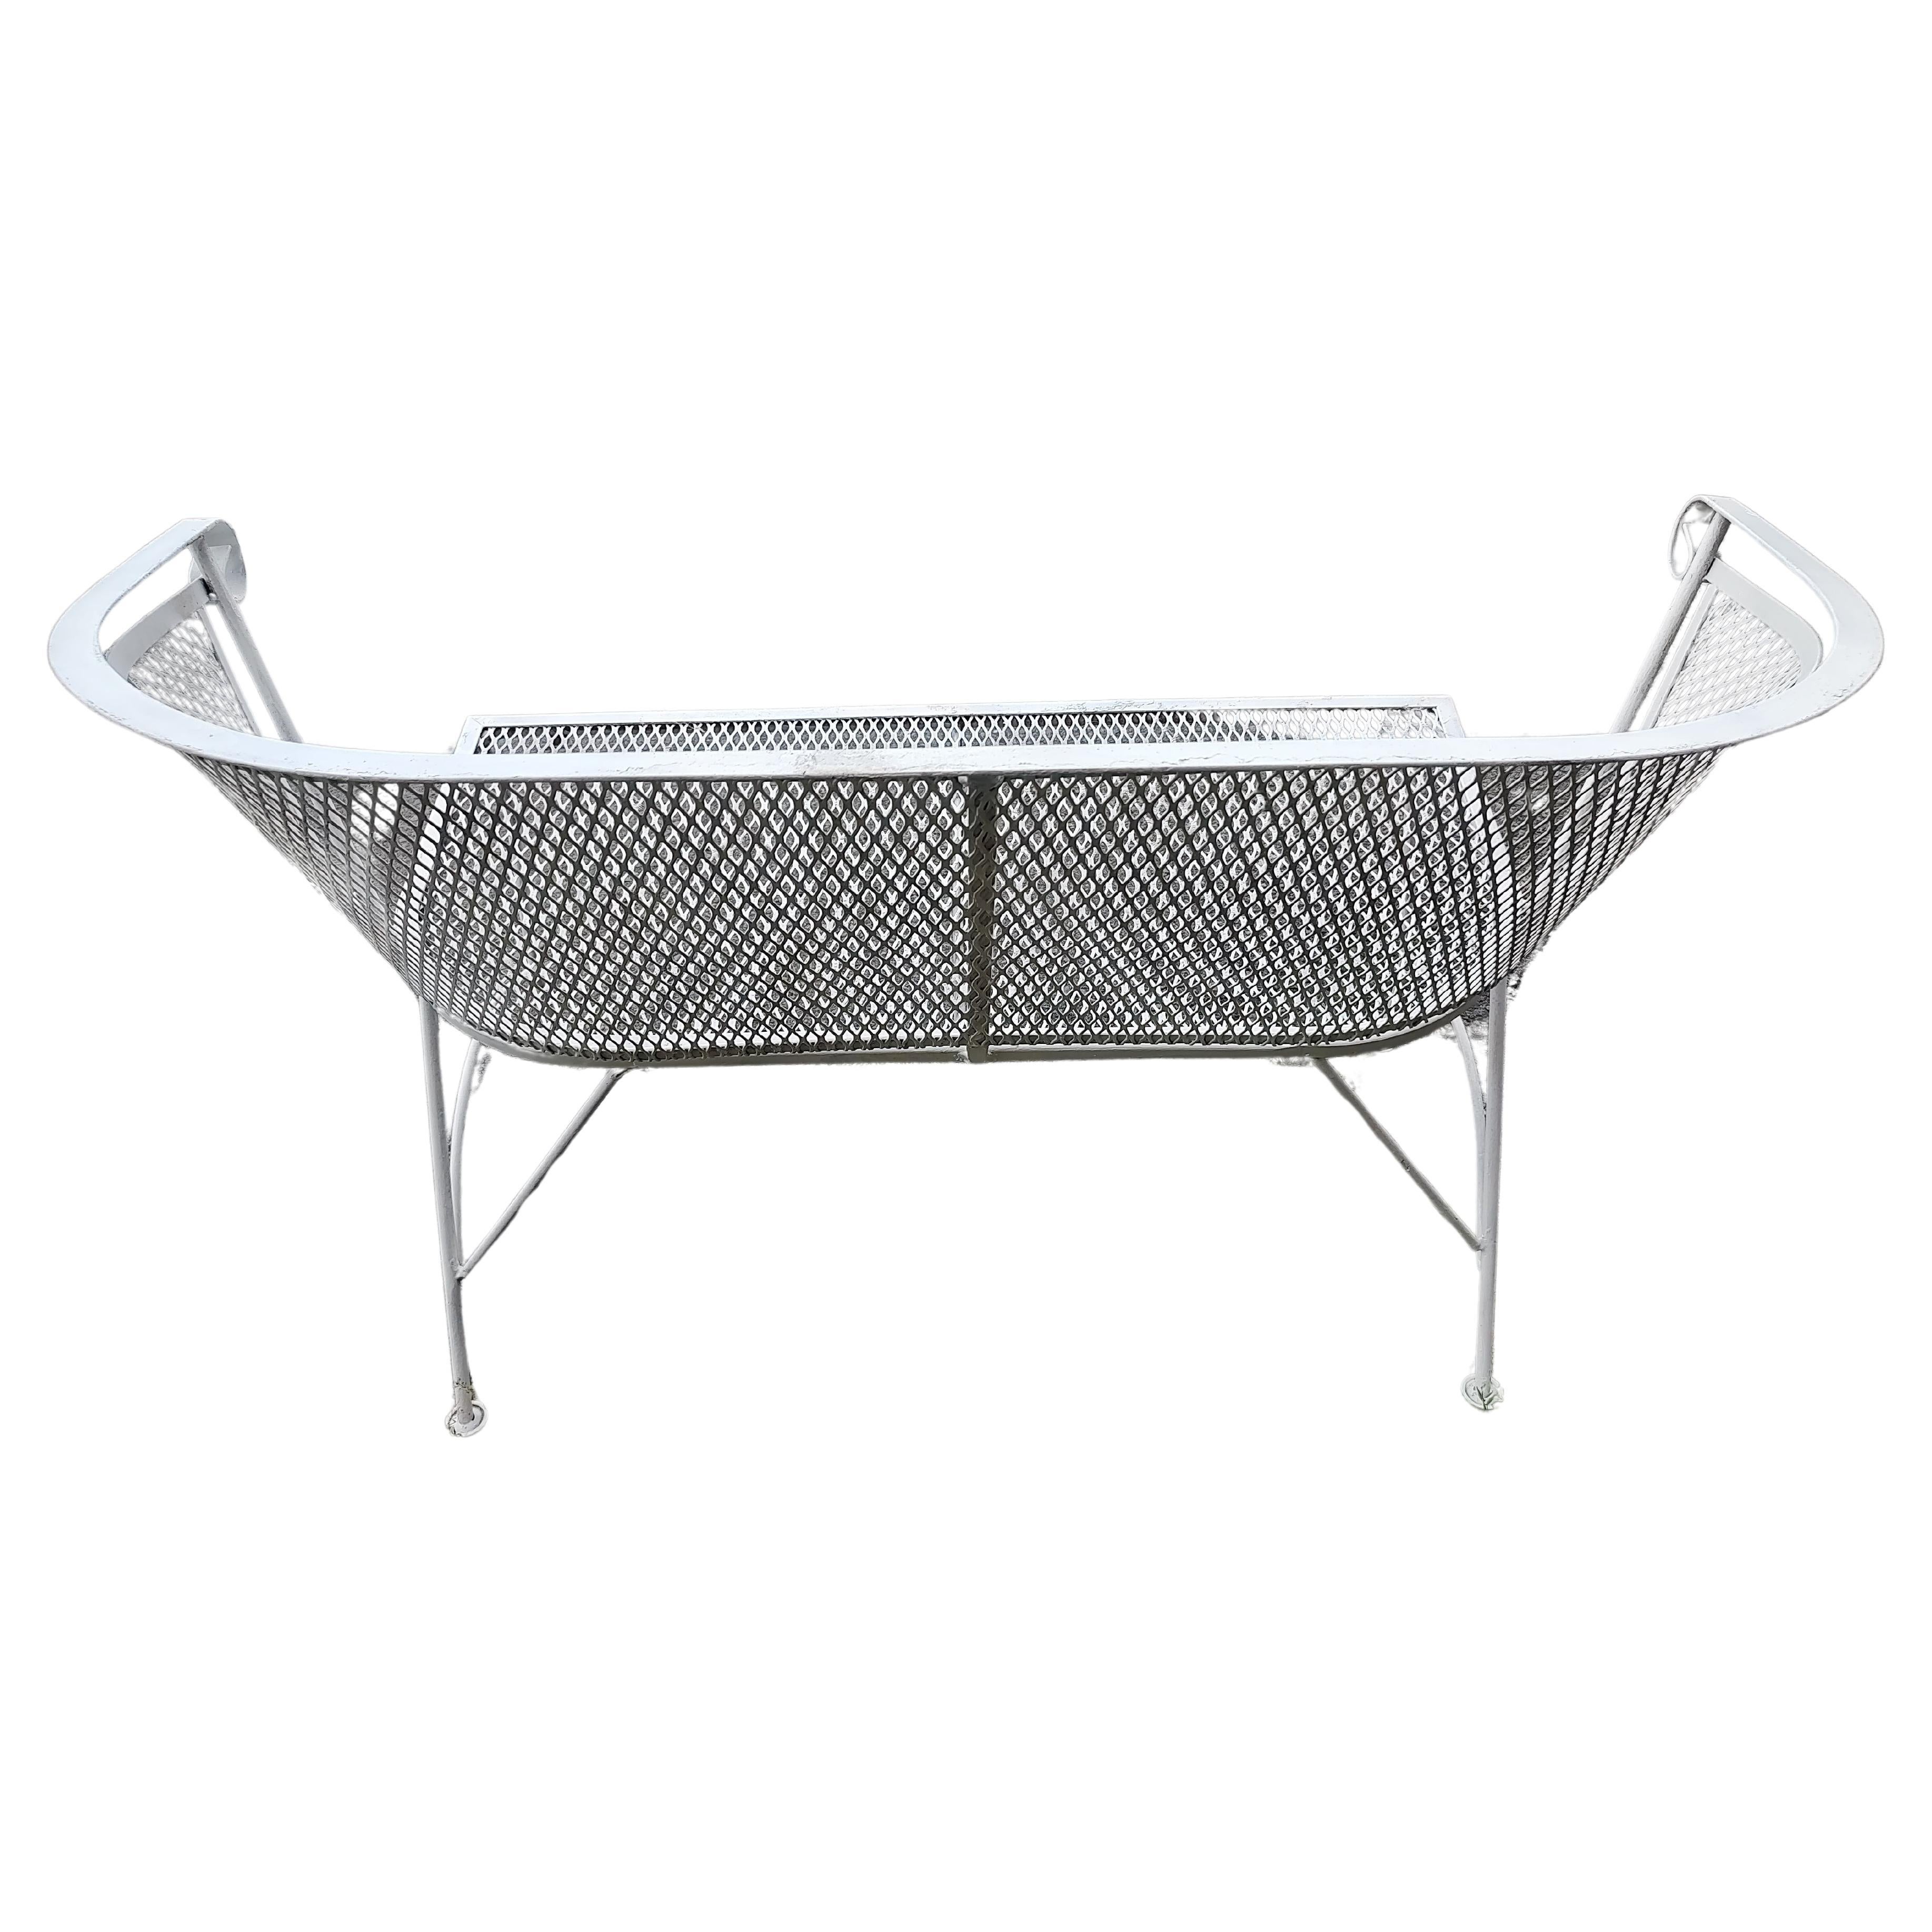 American Mid Century Modern Iron Mesh Garden Bench attributed to Russell Woodard C1960 For Sale